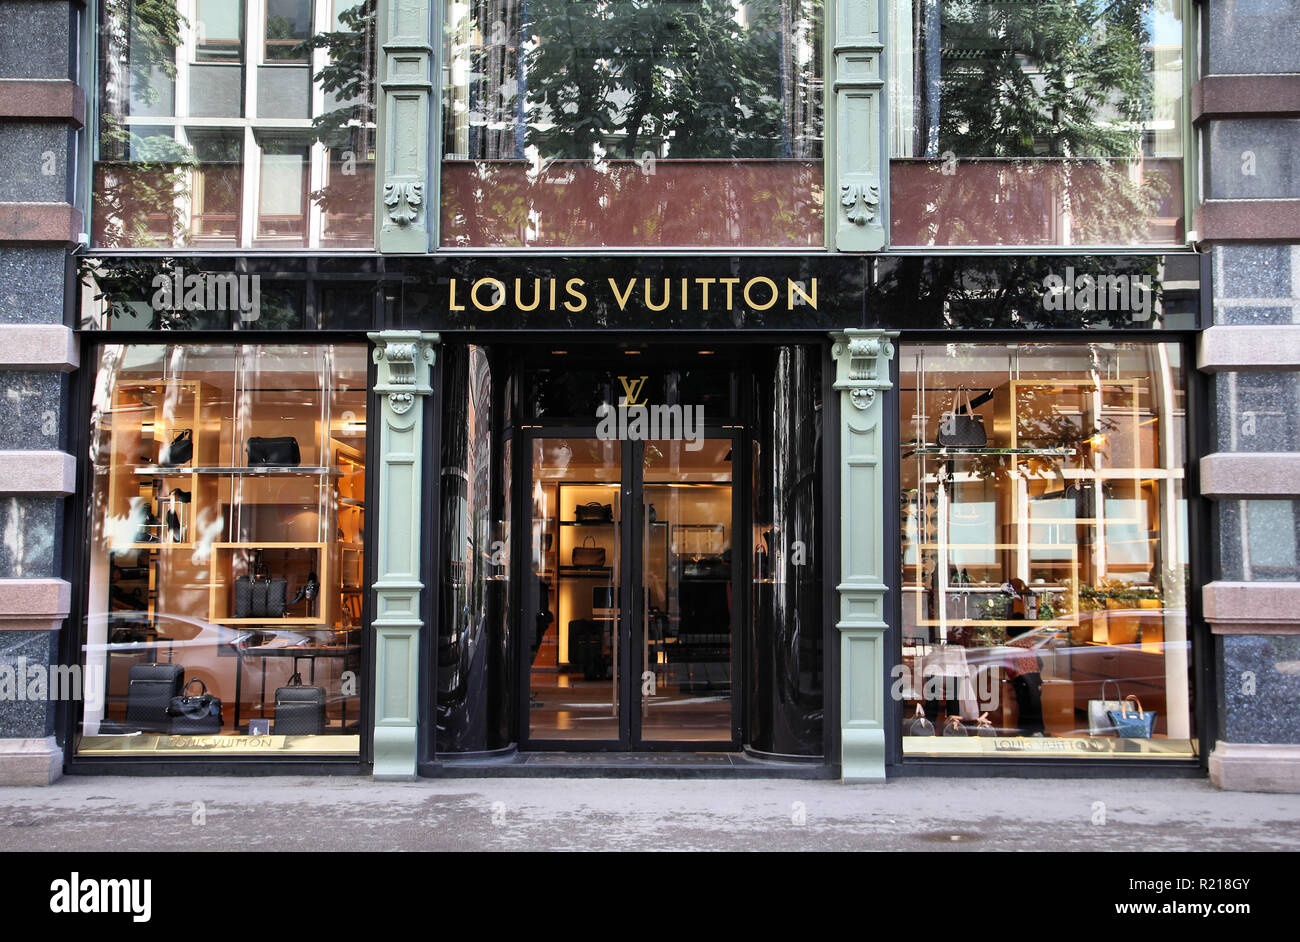 OSLO - AUGUST 21: Louis Vuitton store on August 21, 2010 in Stockholm. Forbes says that Louis Vouitton was the most powerful luxury brand in the Photo - Alamy